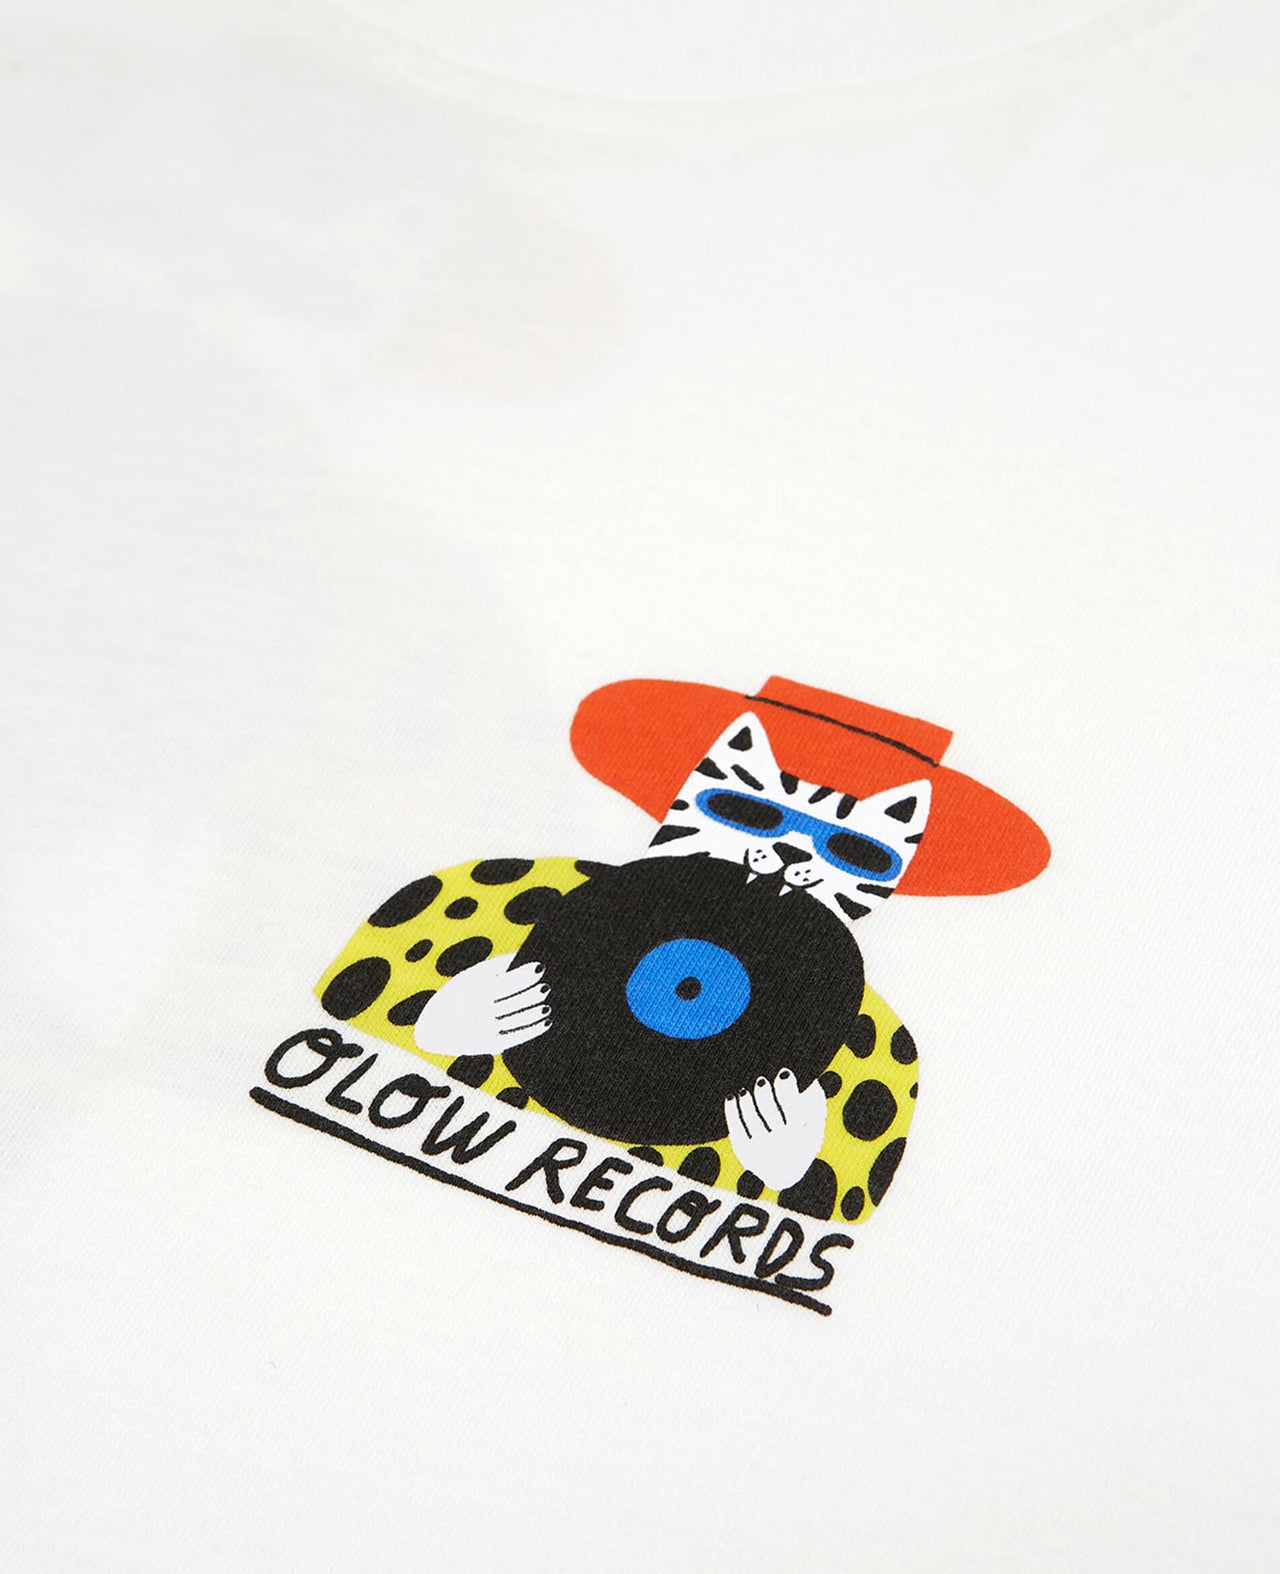 Olow Records T-shirt